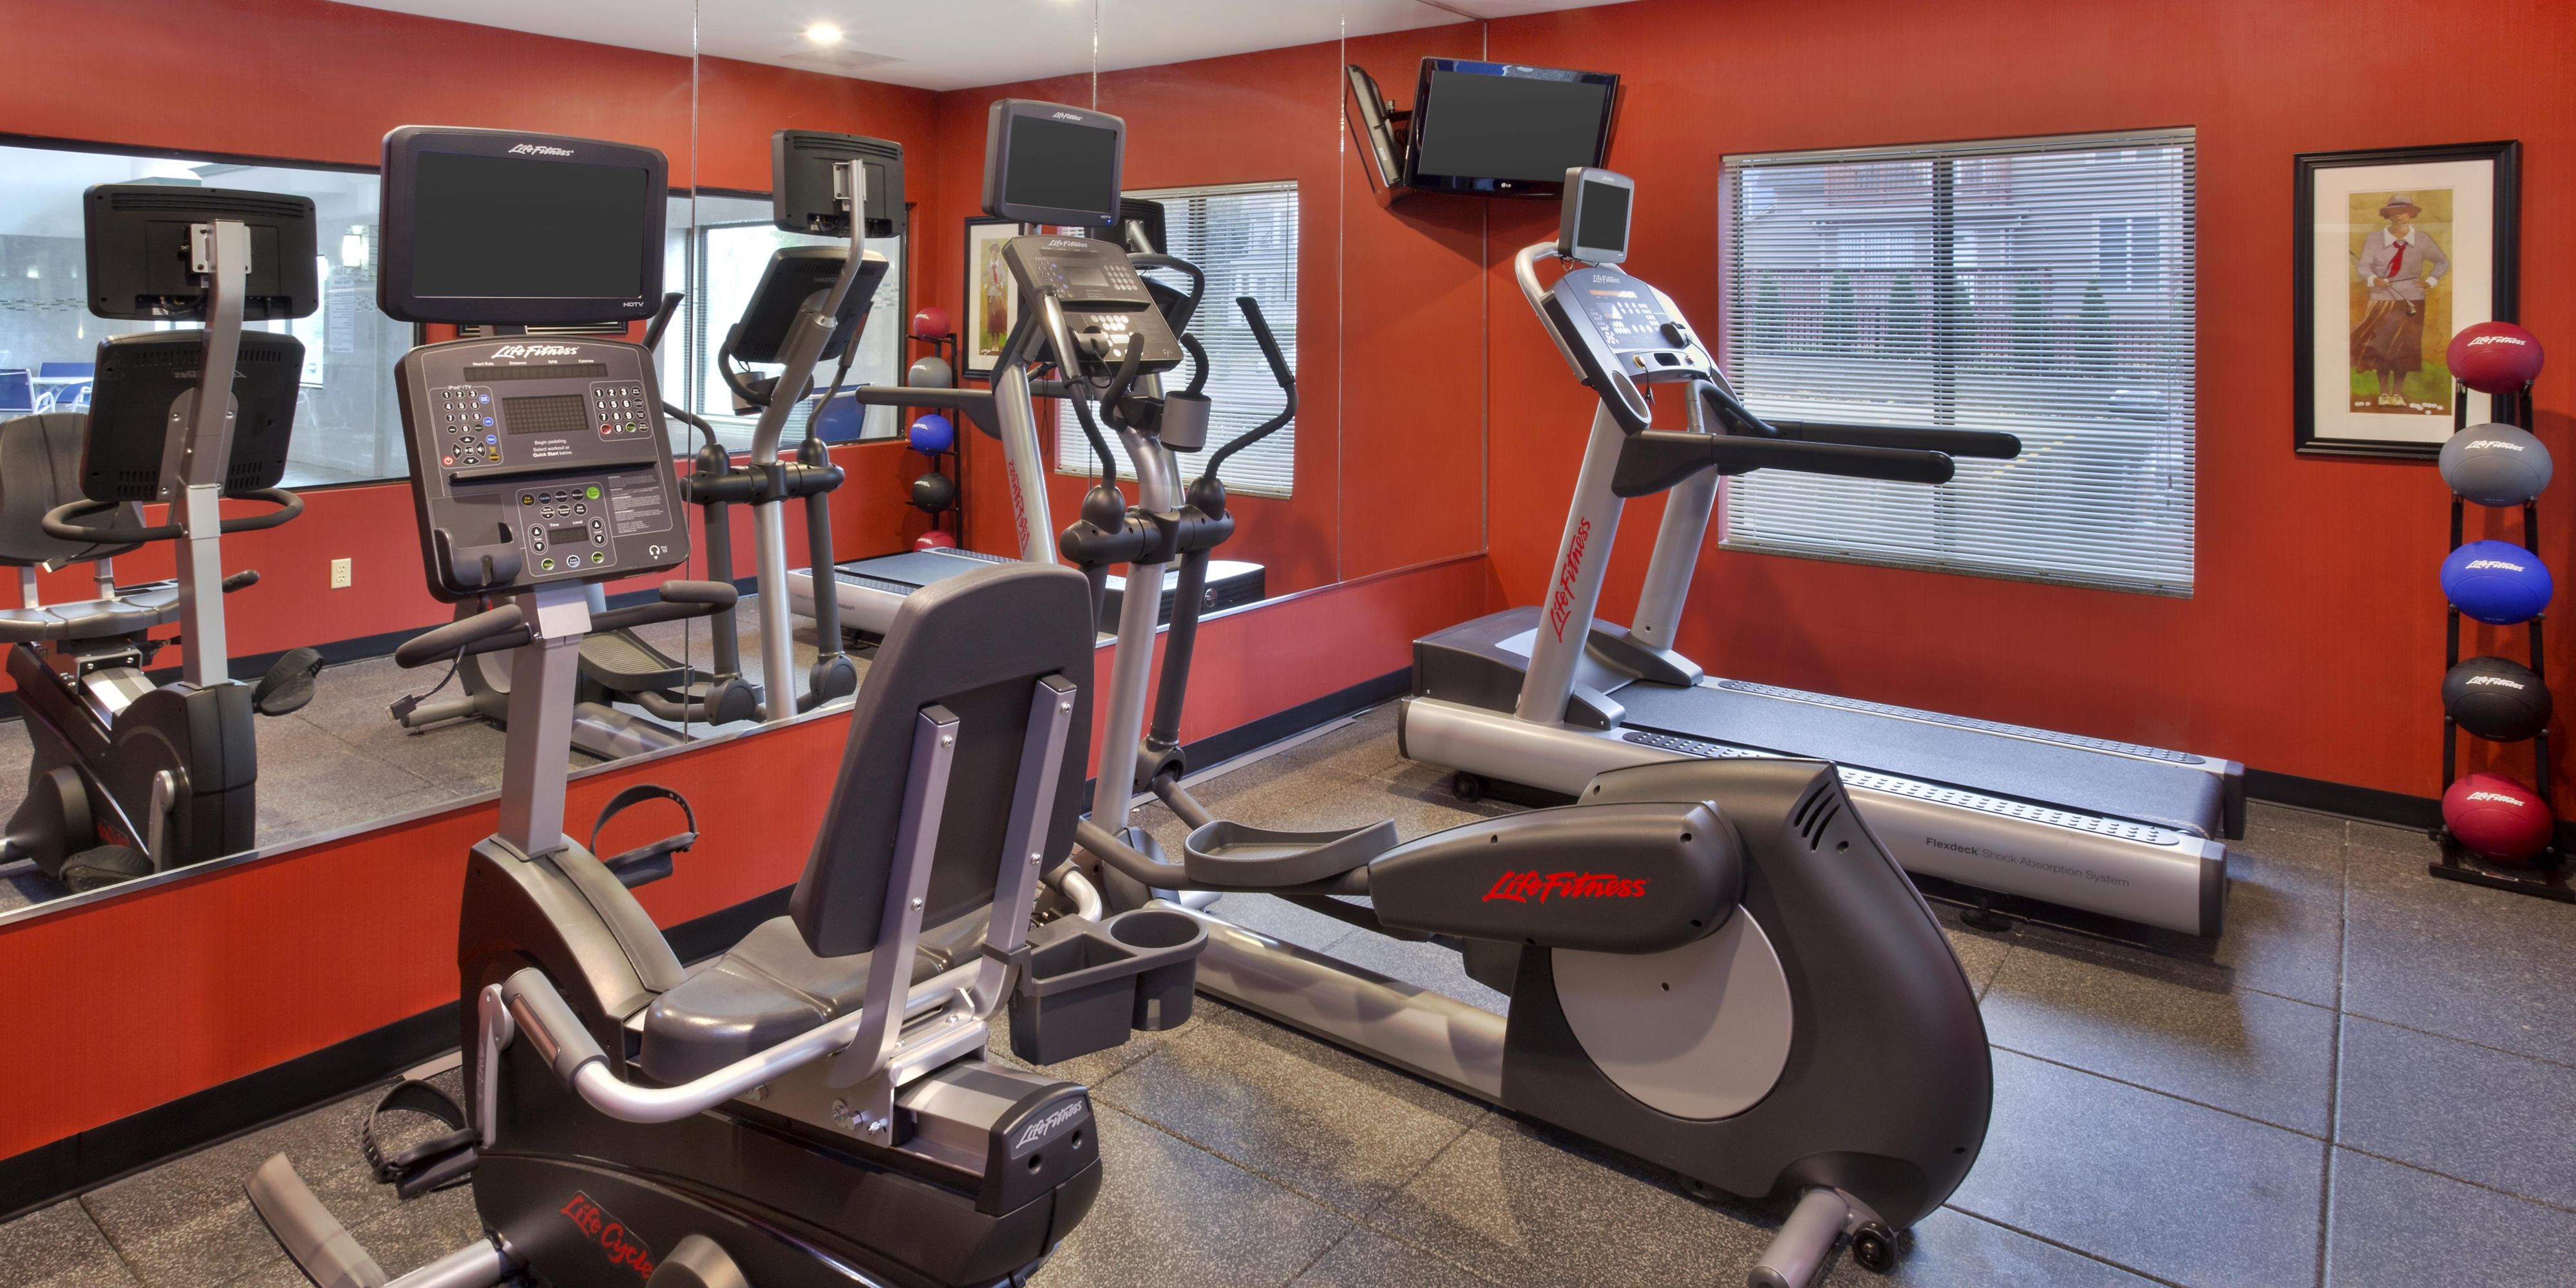 Our fitness center is open all day and every day so there is plenty of time to fit in your routine when staying with us.